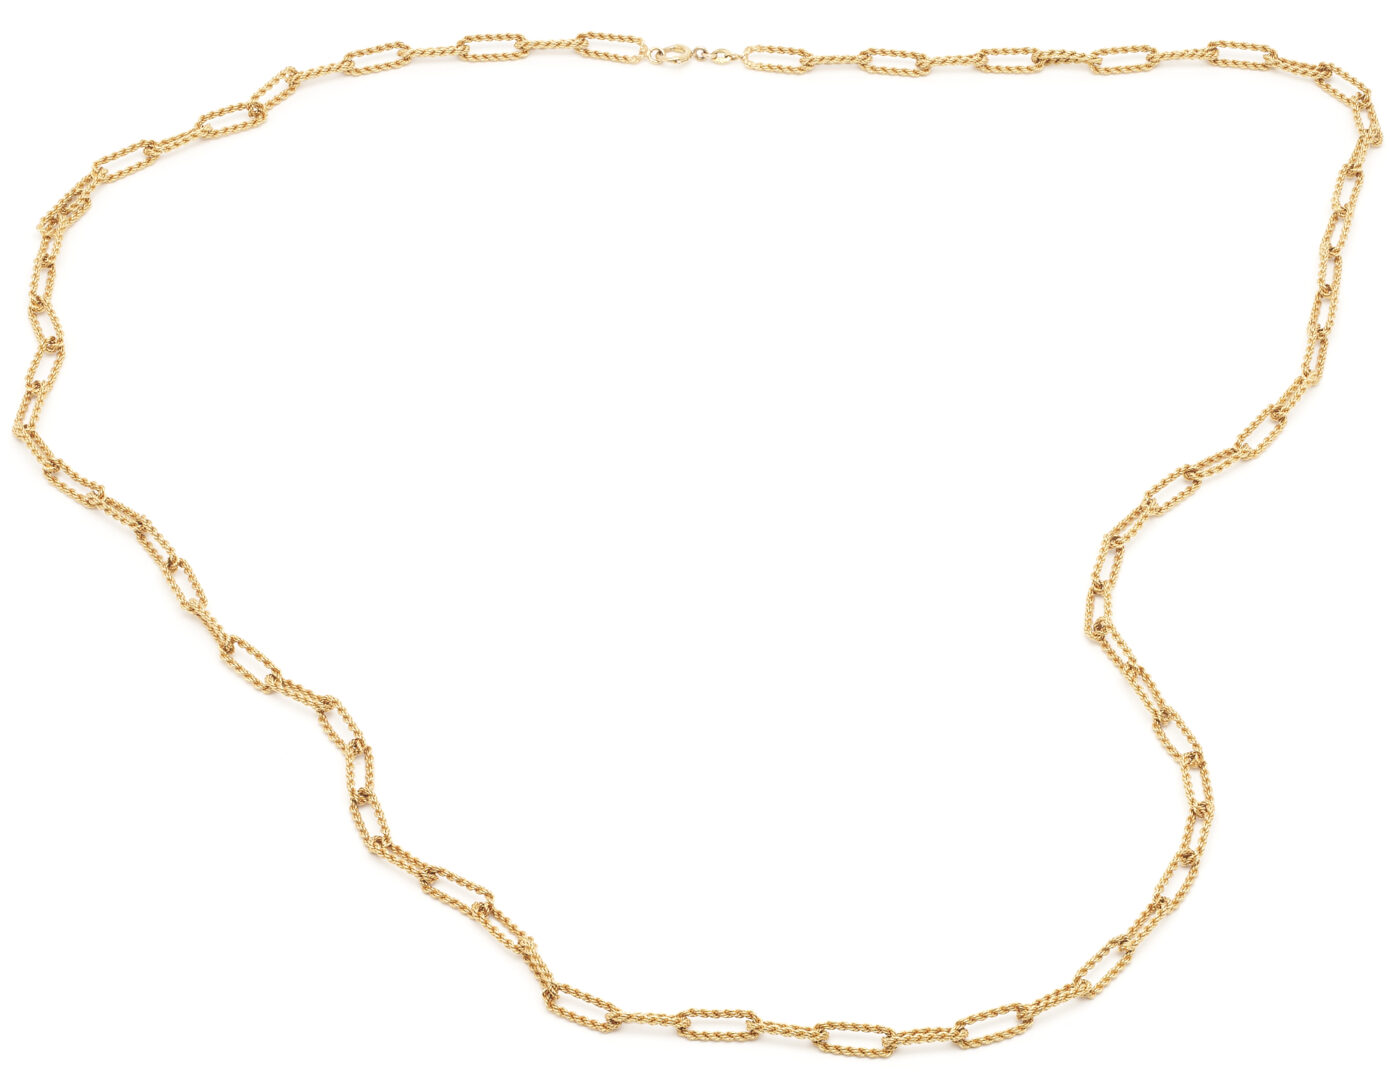 Lot 46: 18K Gold Rope Link Chain Necklace